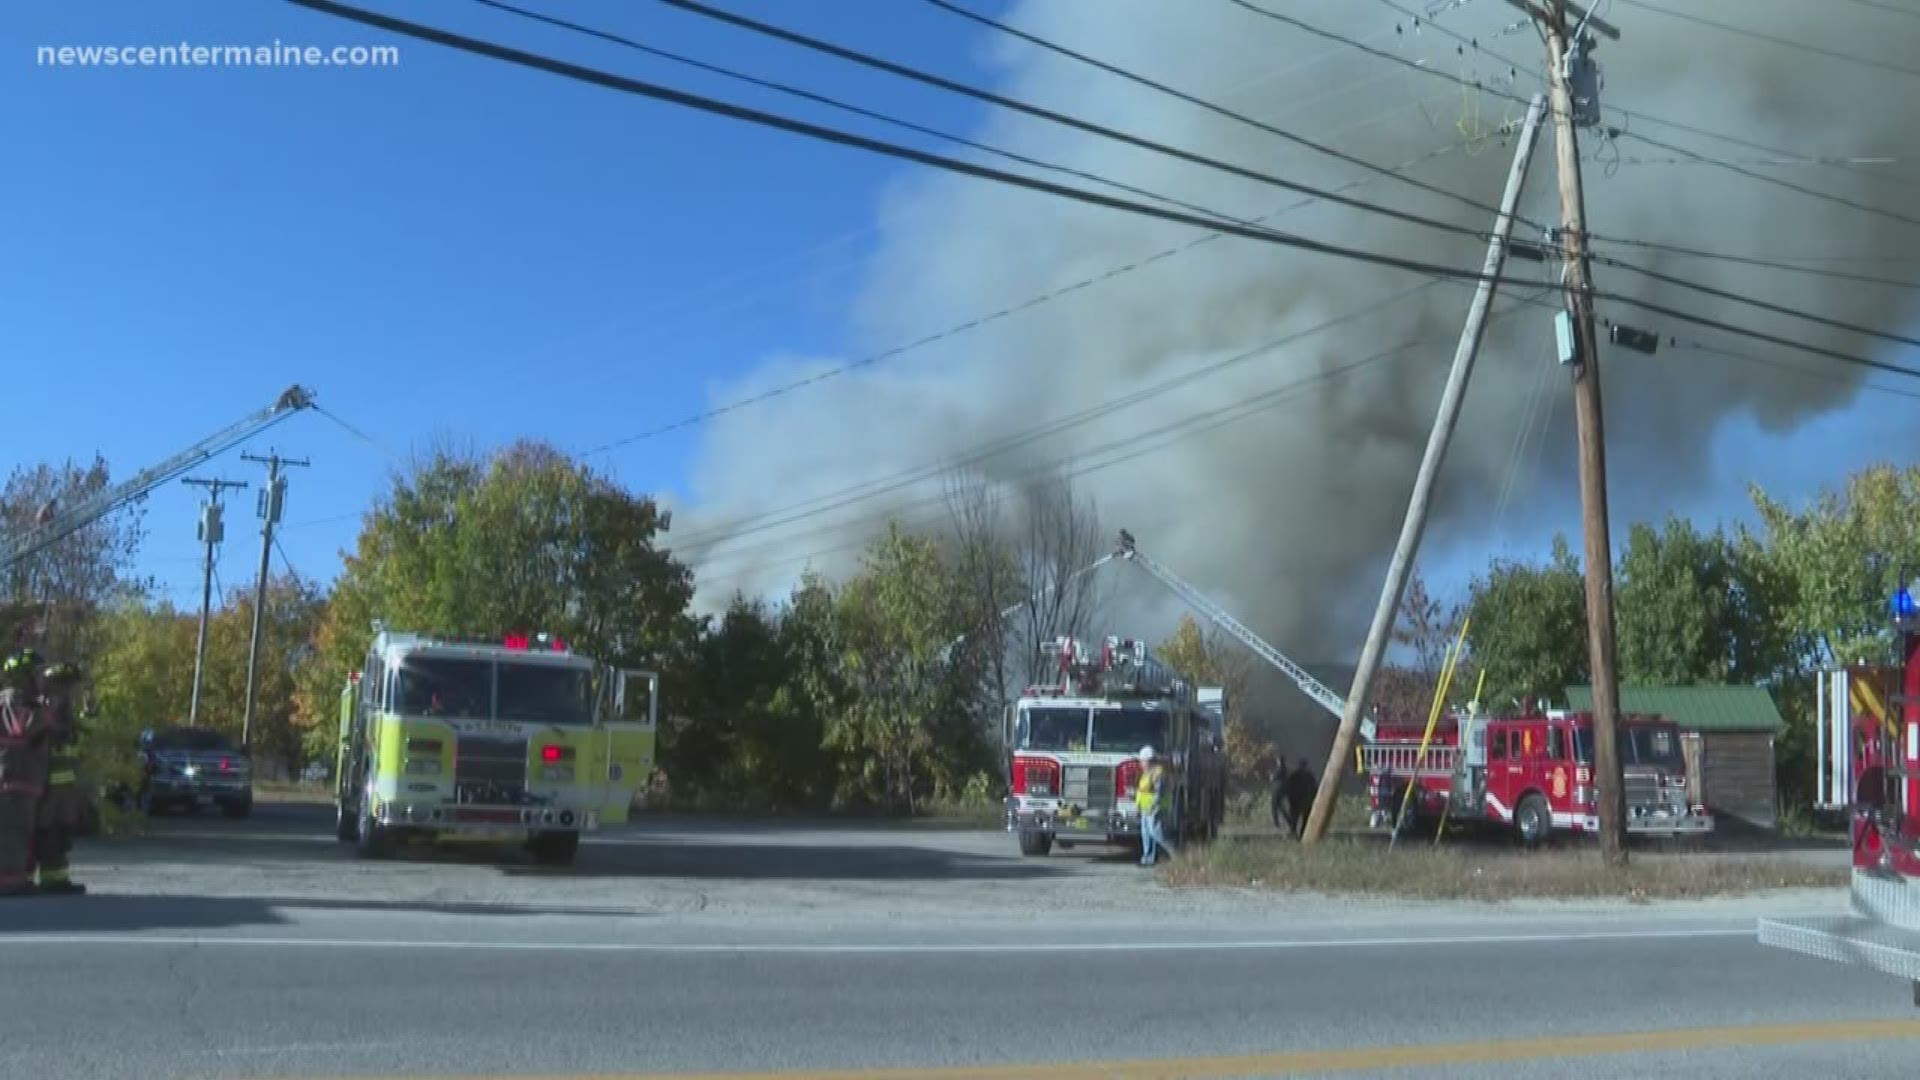 Fire crews from across the state contain fire in Mechanic Falls